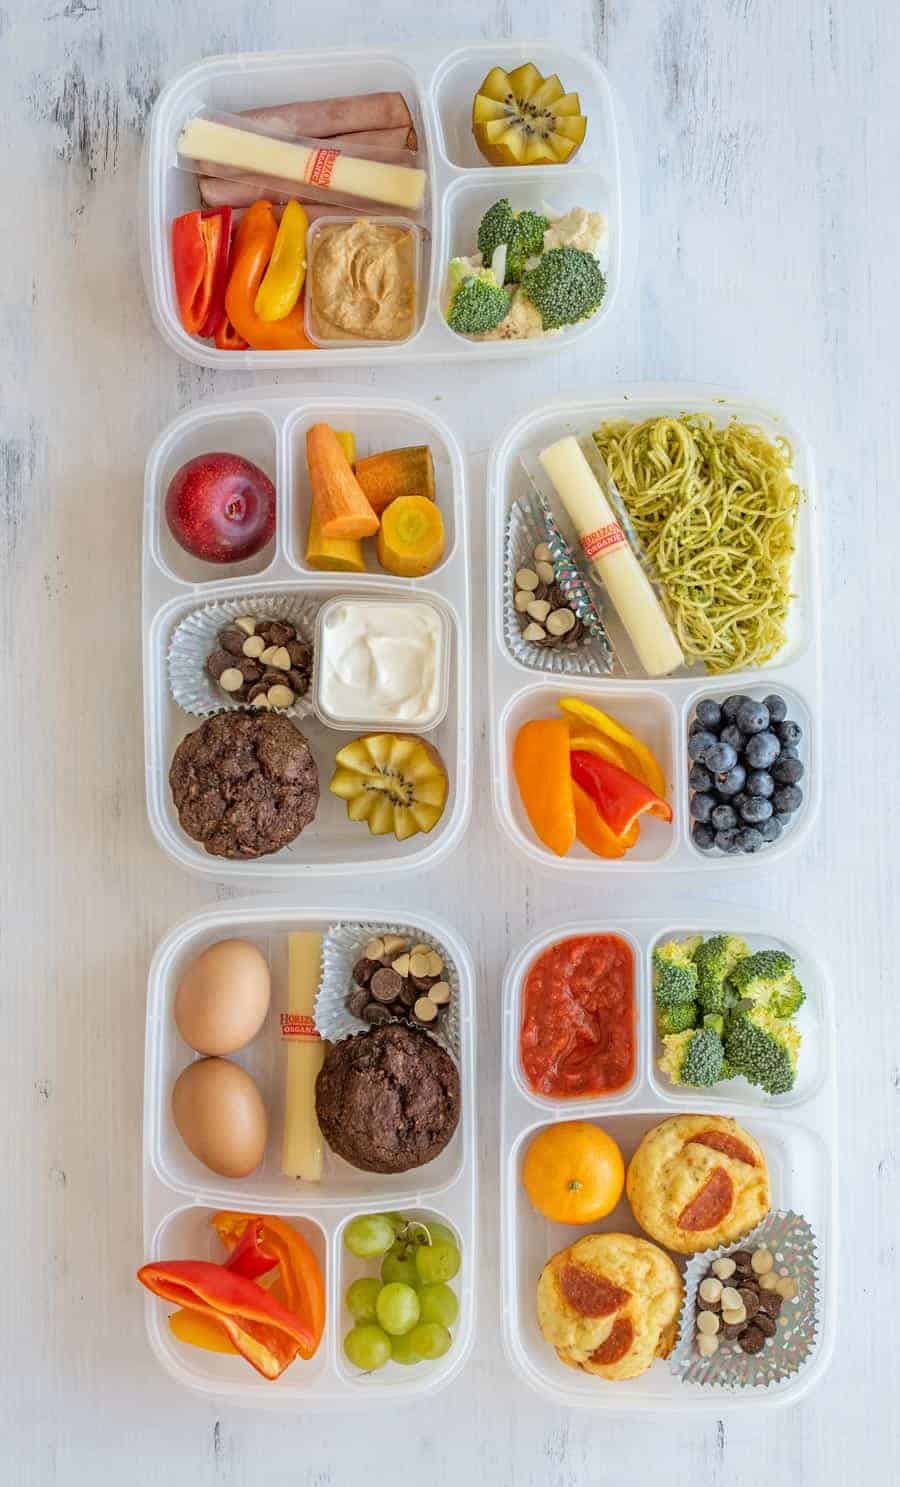 https://www.blessthismessplease.com/wp-content/uploads/2019/08/make-ahead-lunch-box-ideas-1-of-11.jpg